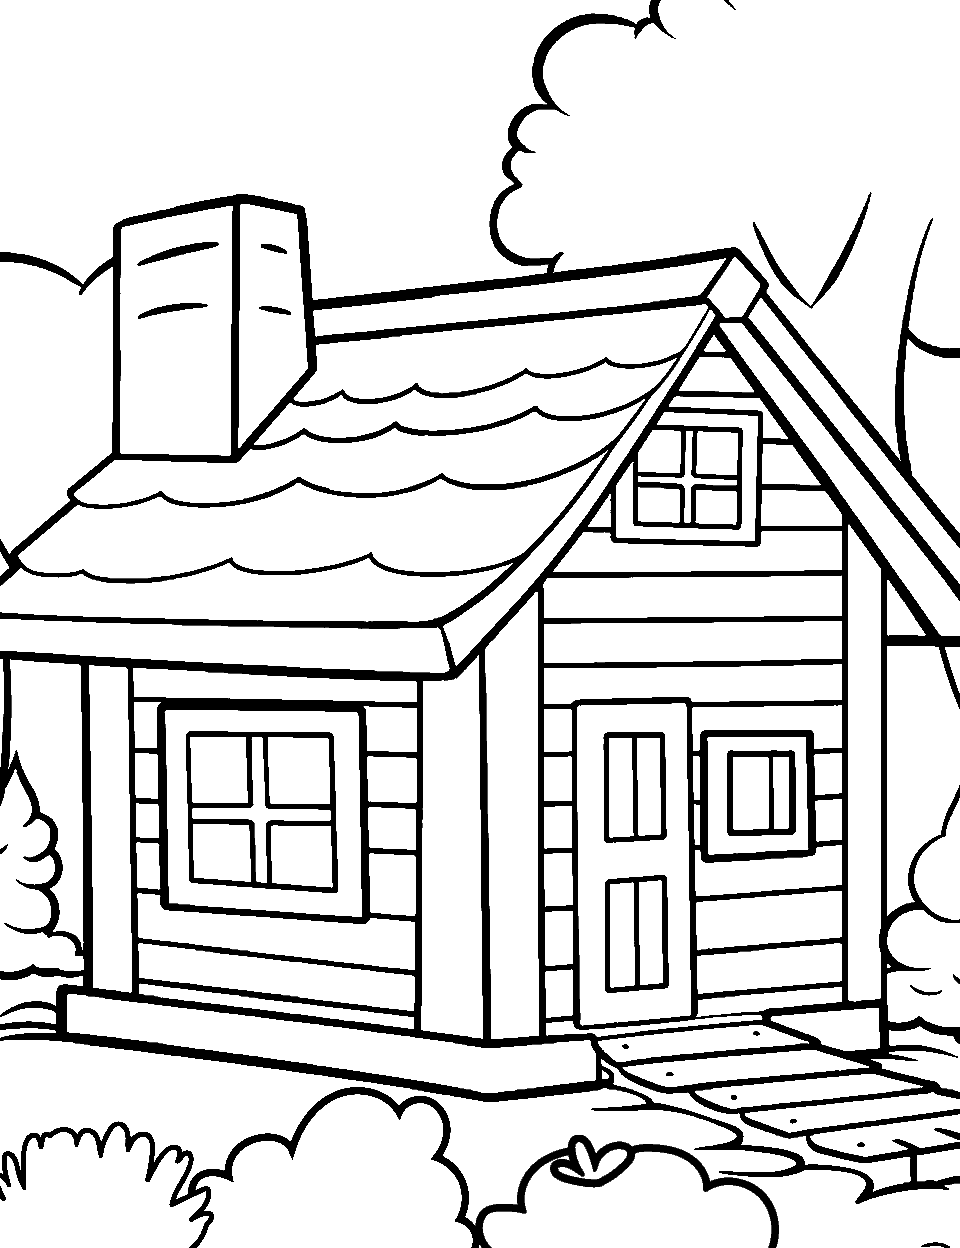 Eco-Friendly Green House Coloring Page - A house covered in plants and foliage.